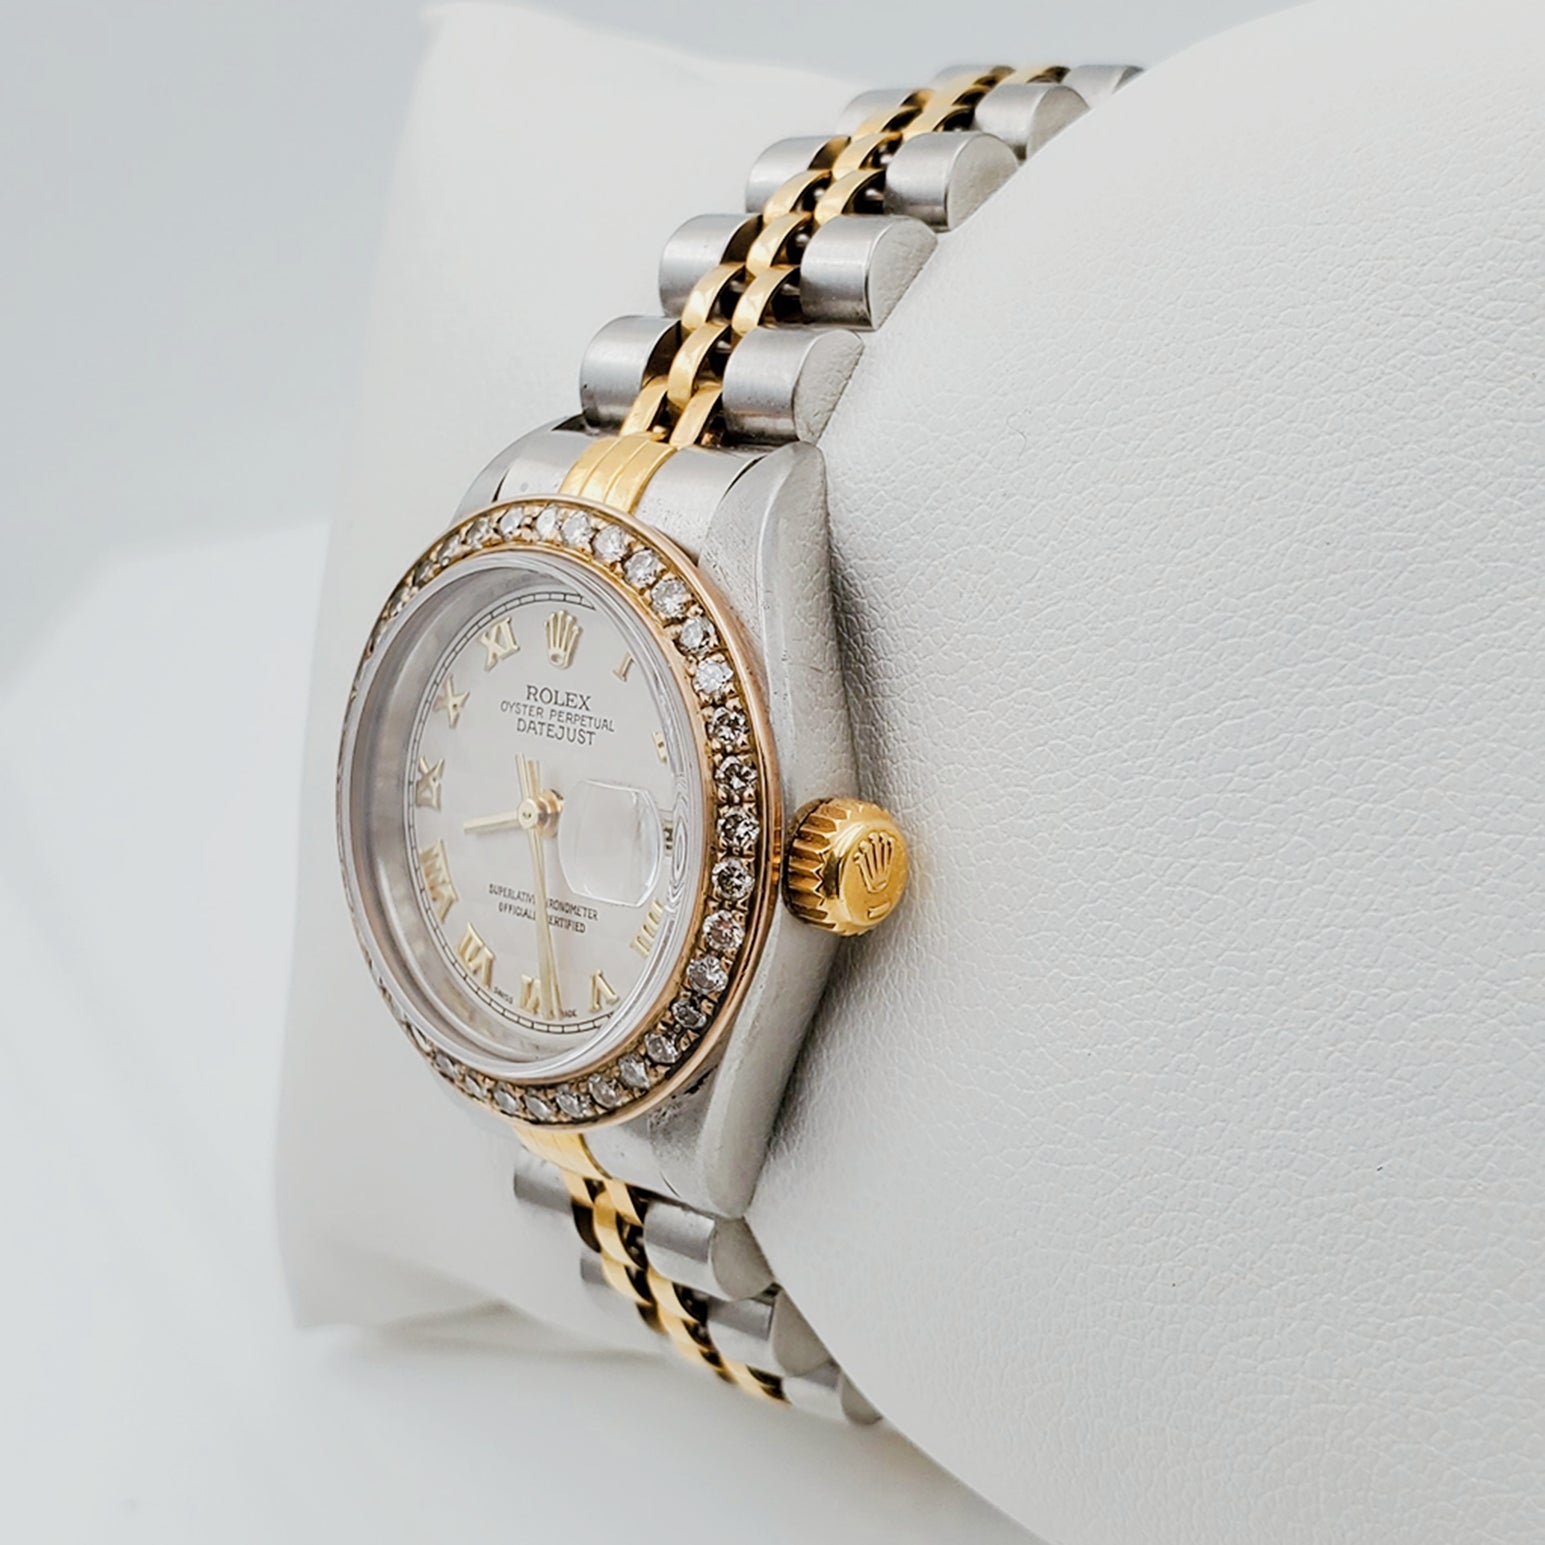 Ladies Rolex 18K Gold Two Tone 26mm DateJust Wristwatch w/ Roman Numerals, Off-White Dial & Diamond Bezel. (Pre-Owned)